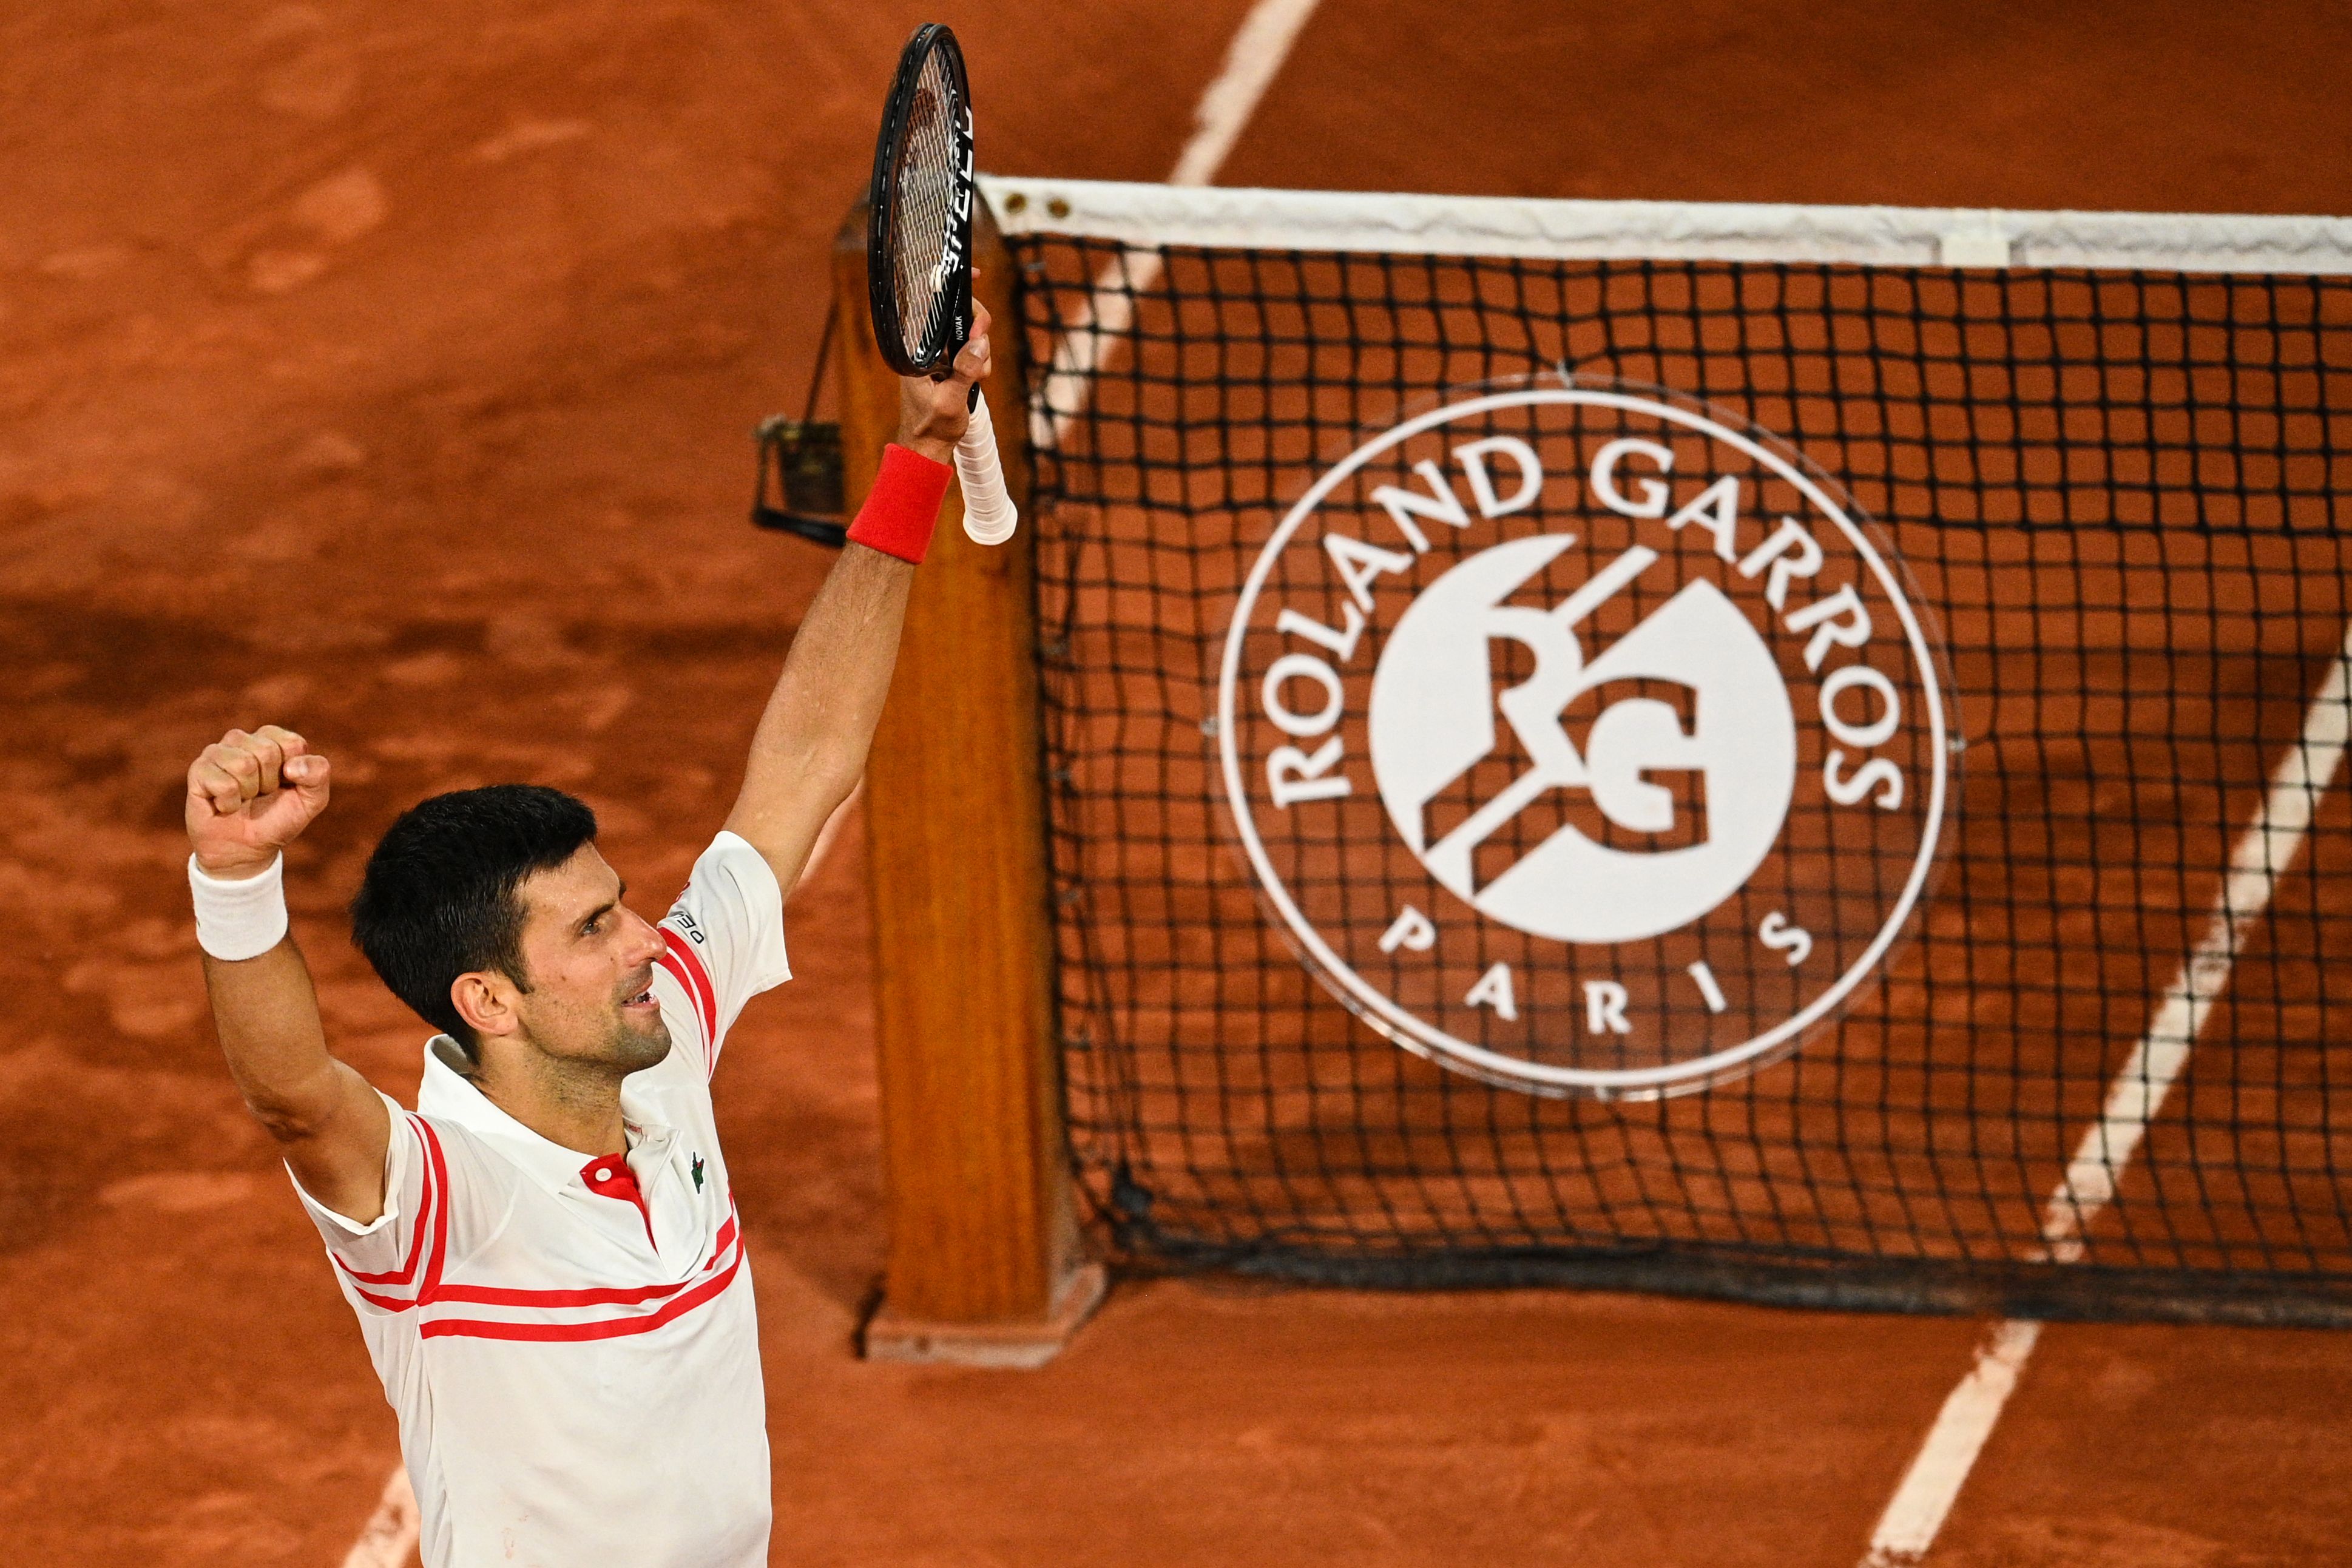 Roland-Garros: Archive is now licensed by IMG